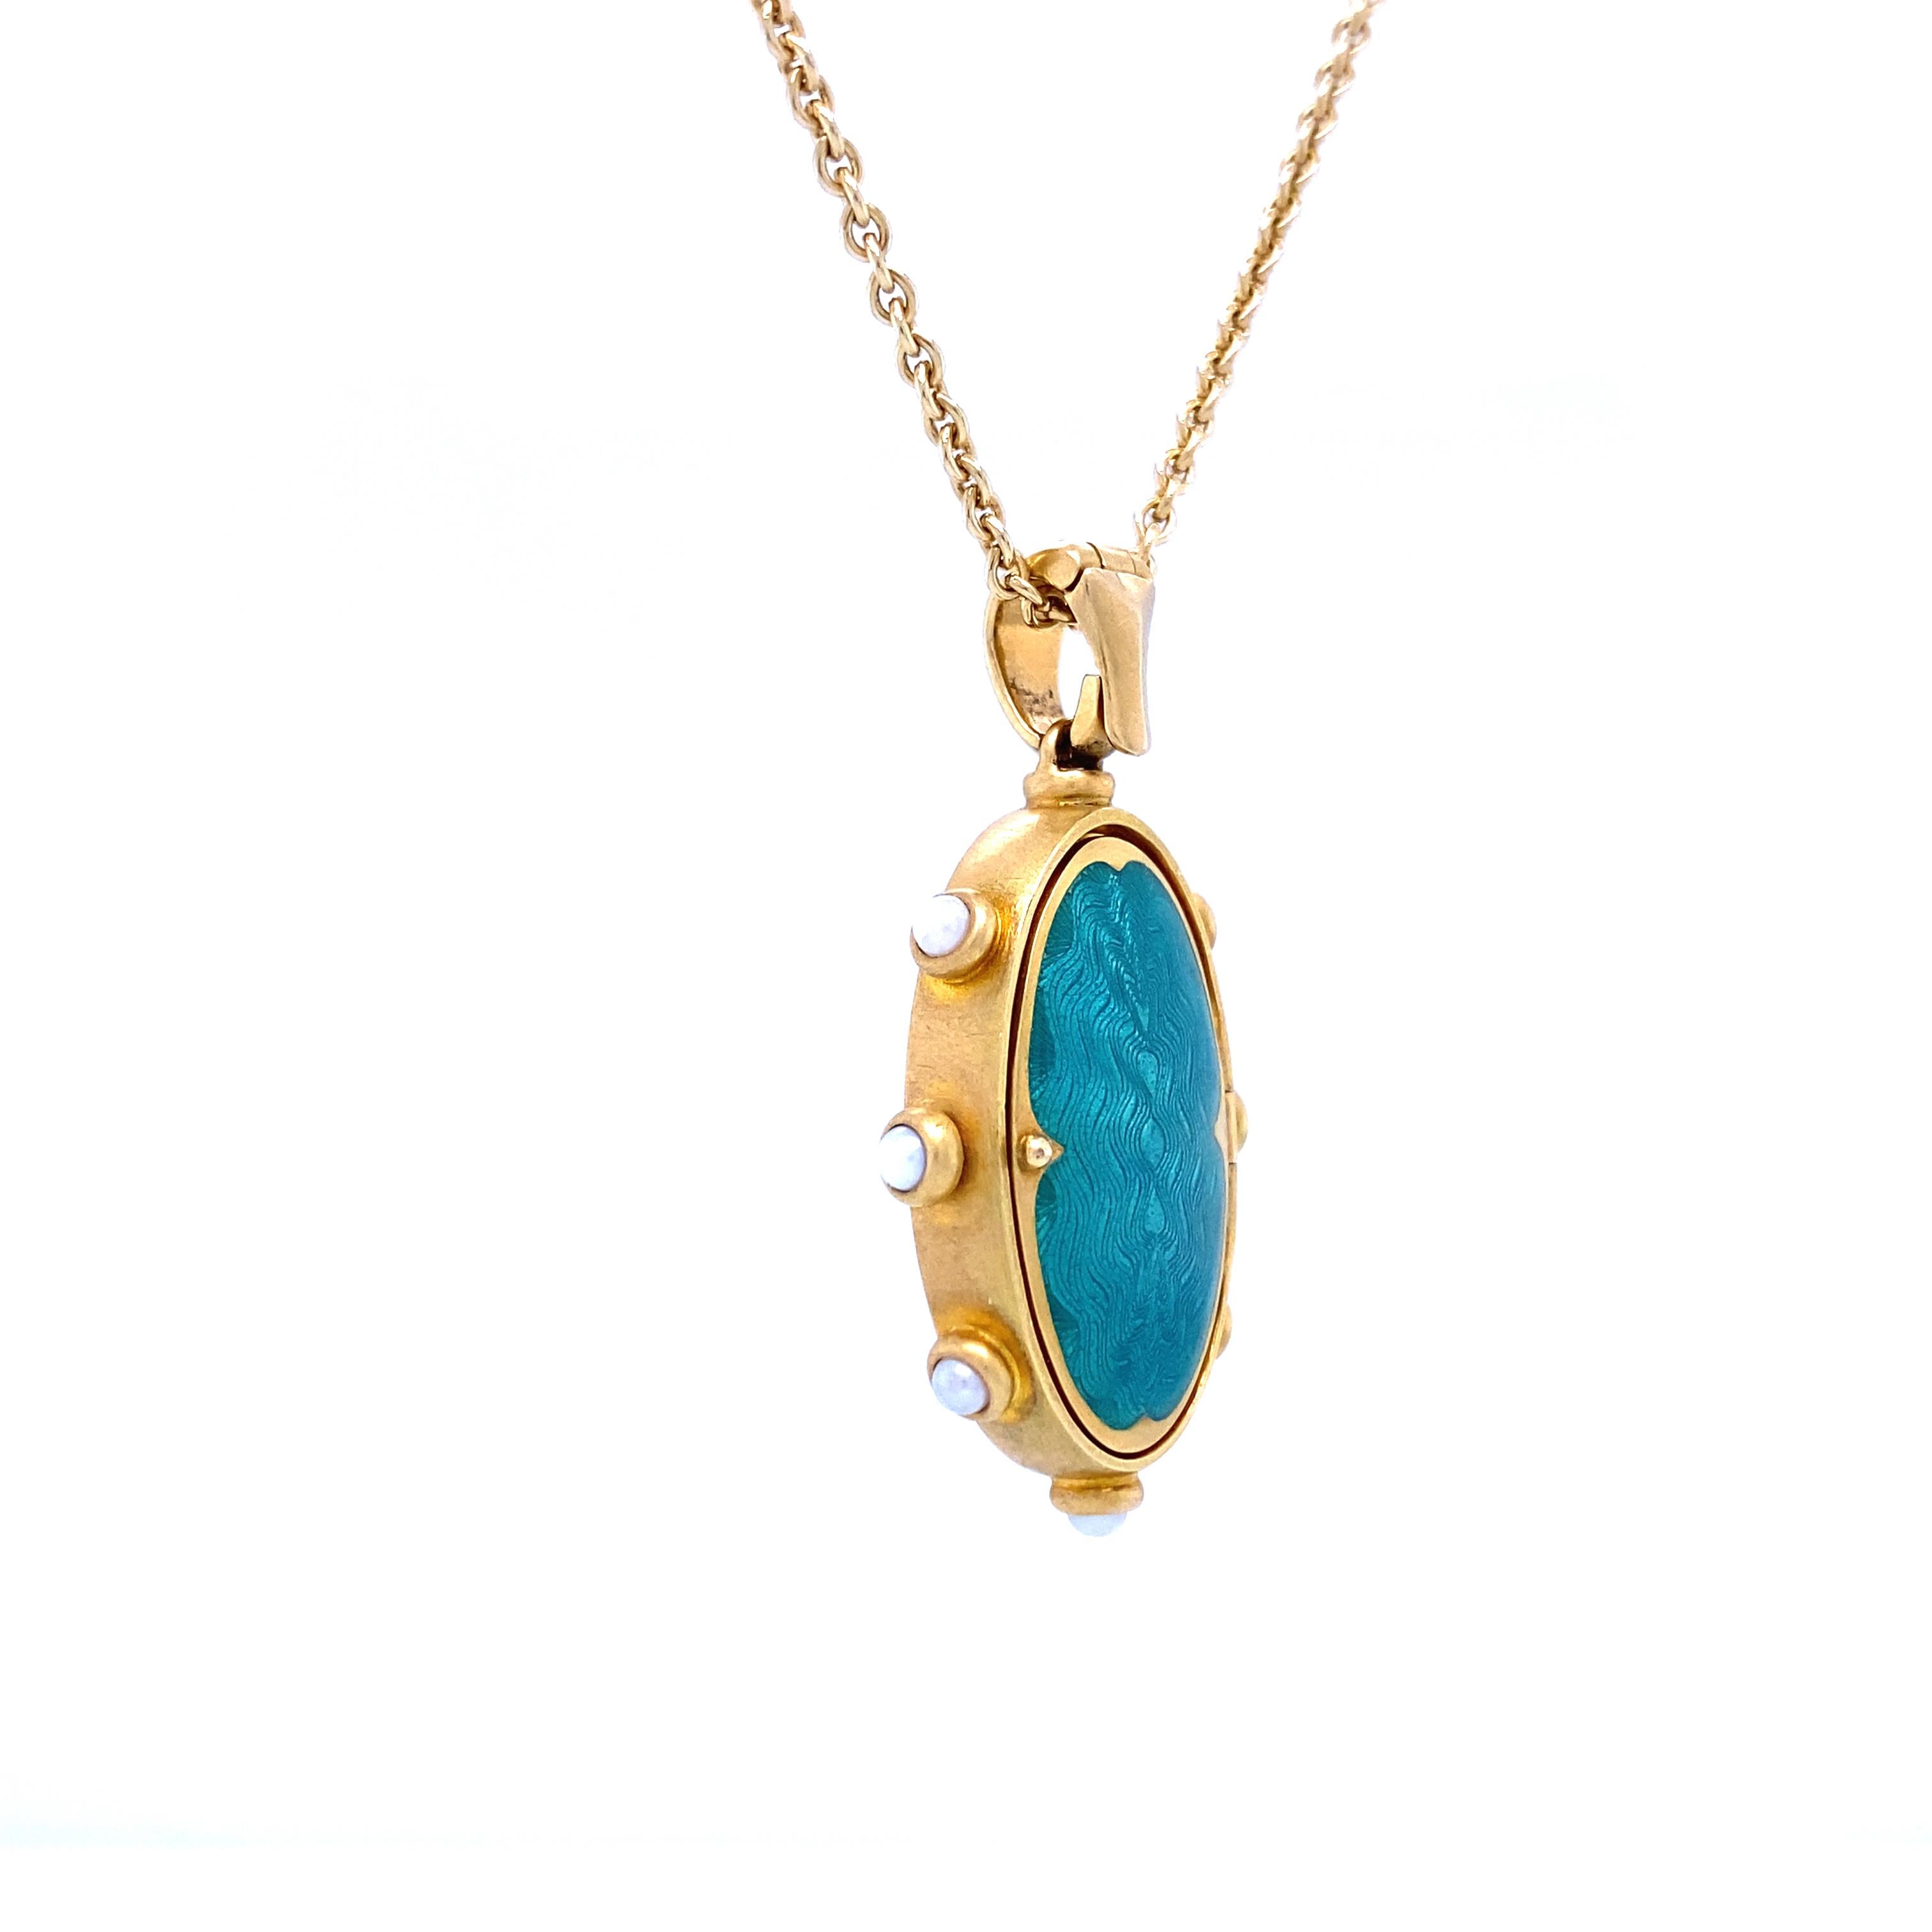 Oval Locket Pendant Necklace 18k Yellow Gold Turquoise Enamel Rubellite & Pearls In New Condition For Sale In Pforzheim, DE